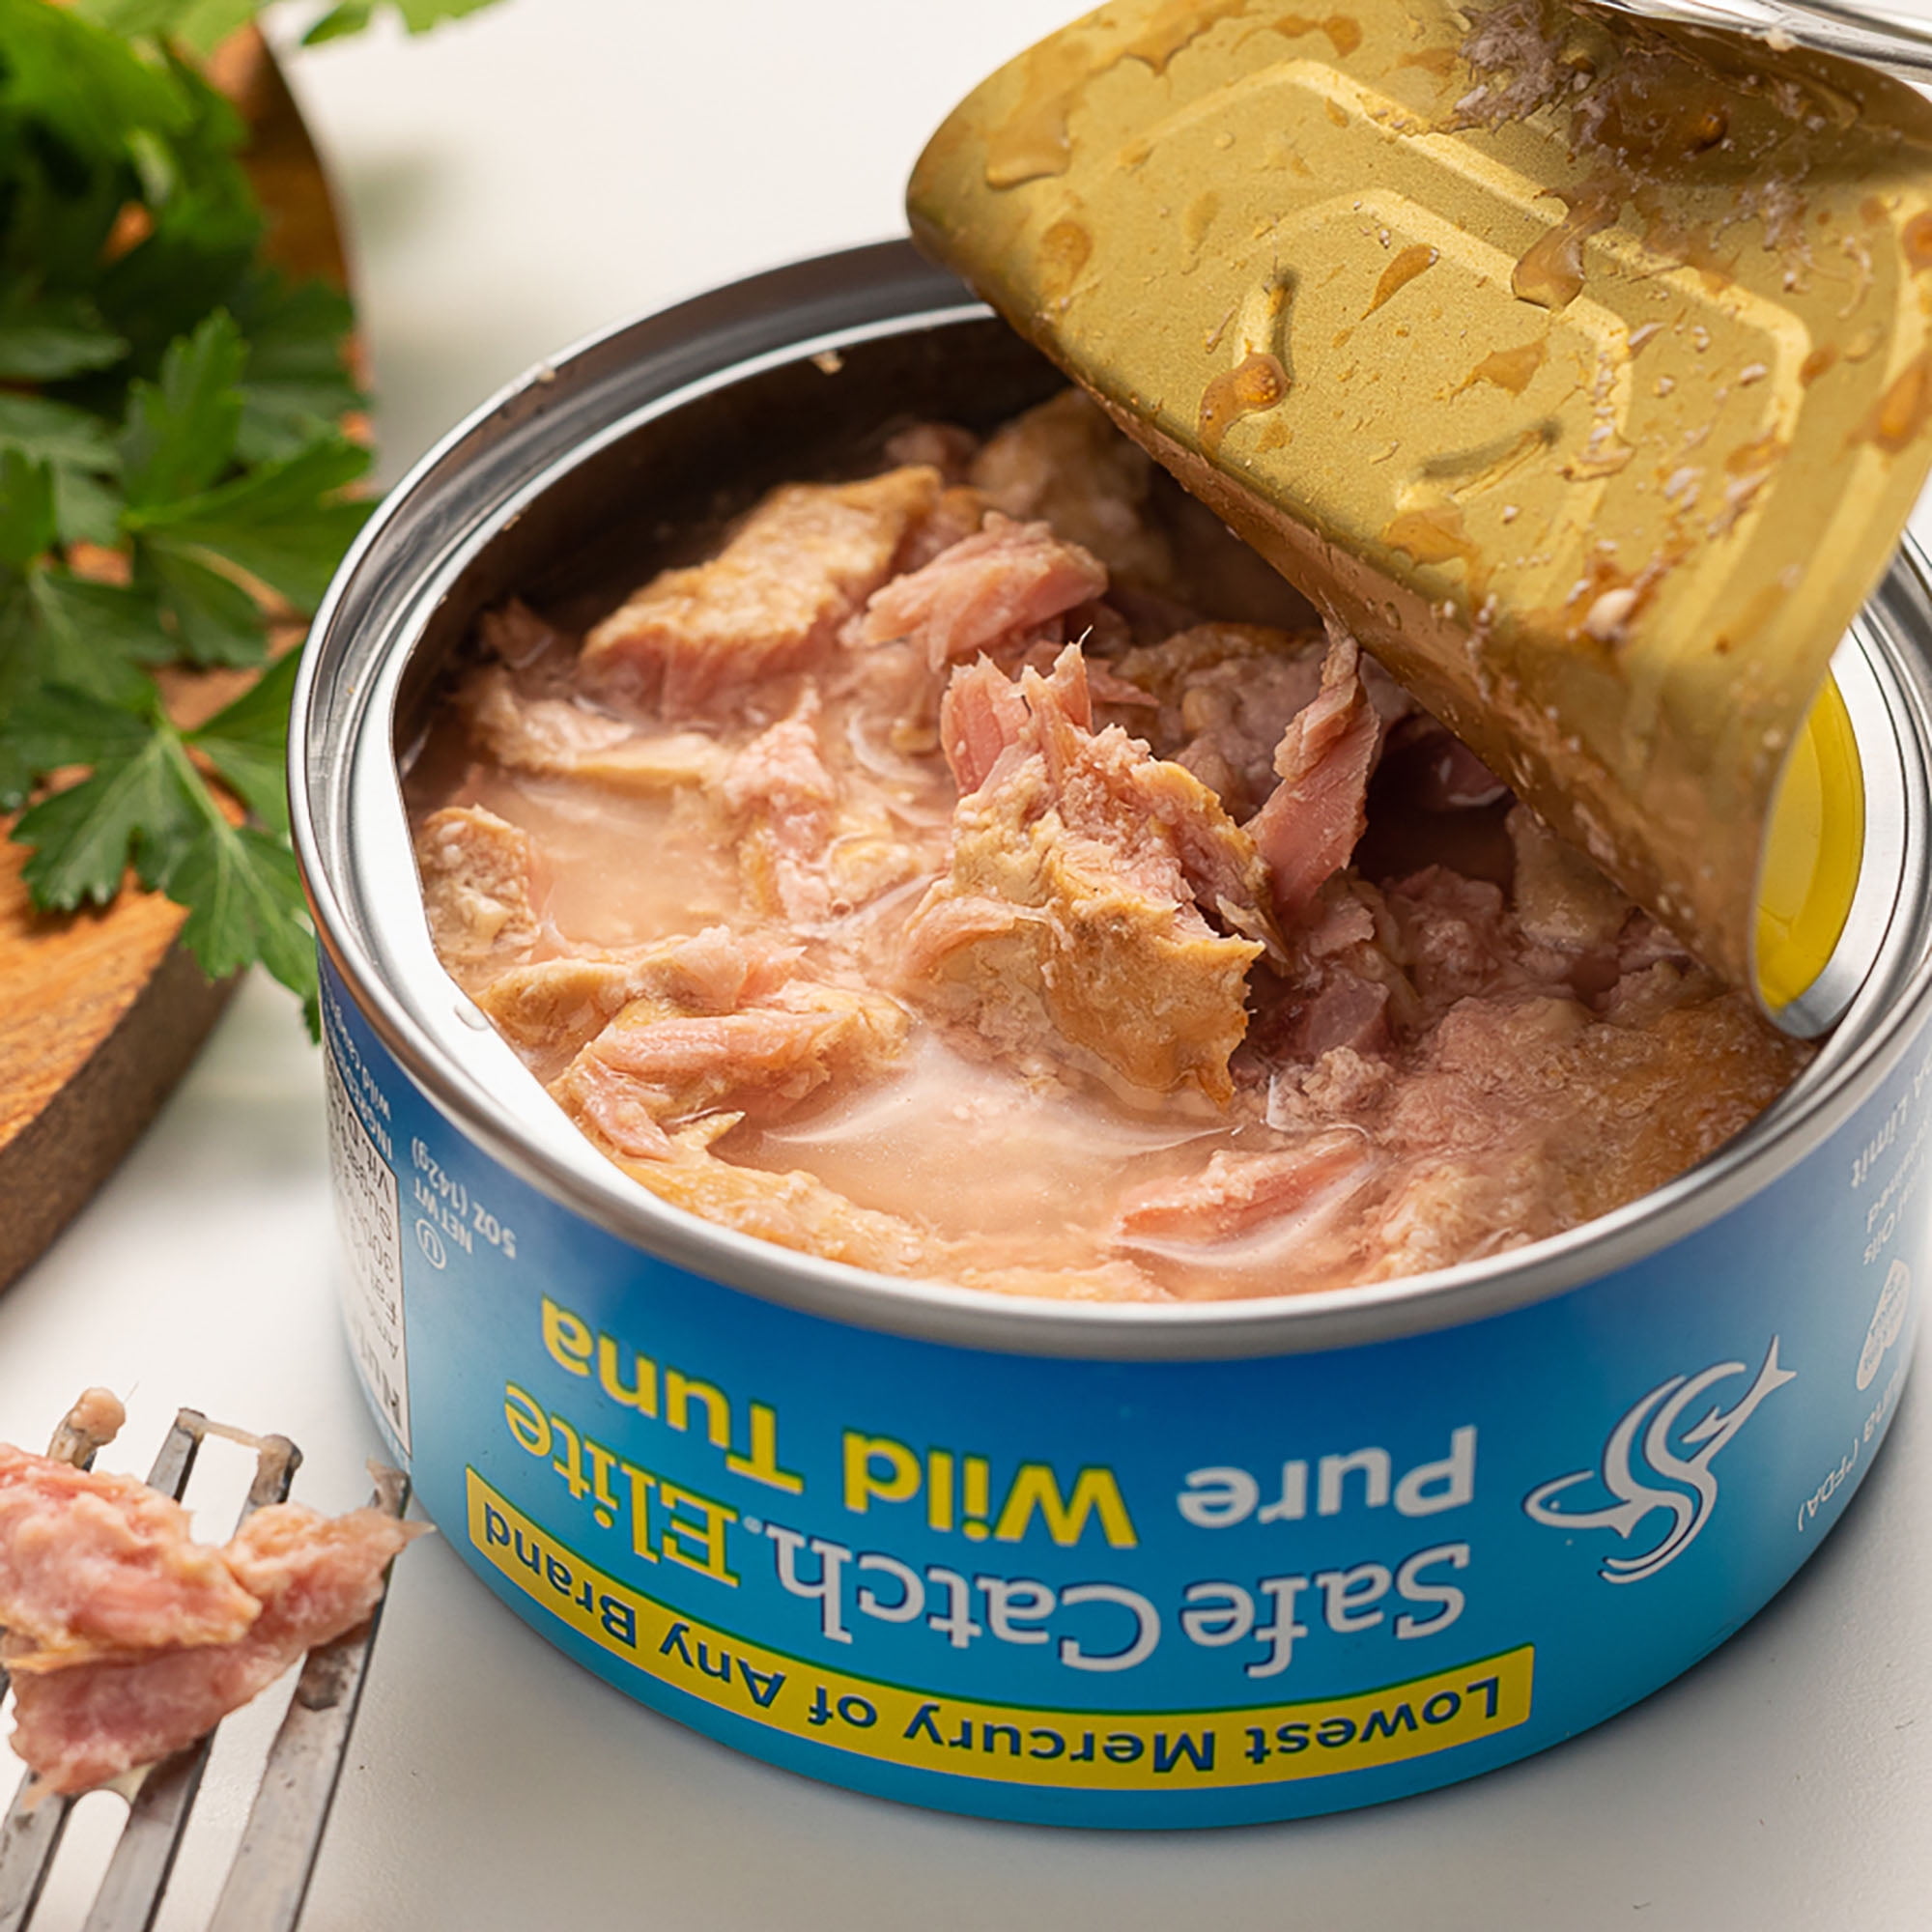 Safe Catch Elite Tuna Canned Wild Caught Tuna Fish Low Mercury Can Tuna  Solid Steak Gluten-Free Keto Non-GMO Kosher Paleo-Friendly High Protein  Food, Every Can Of Tuna Is Tested, 12 Pack 5oz